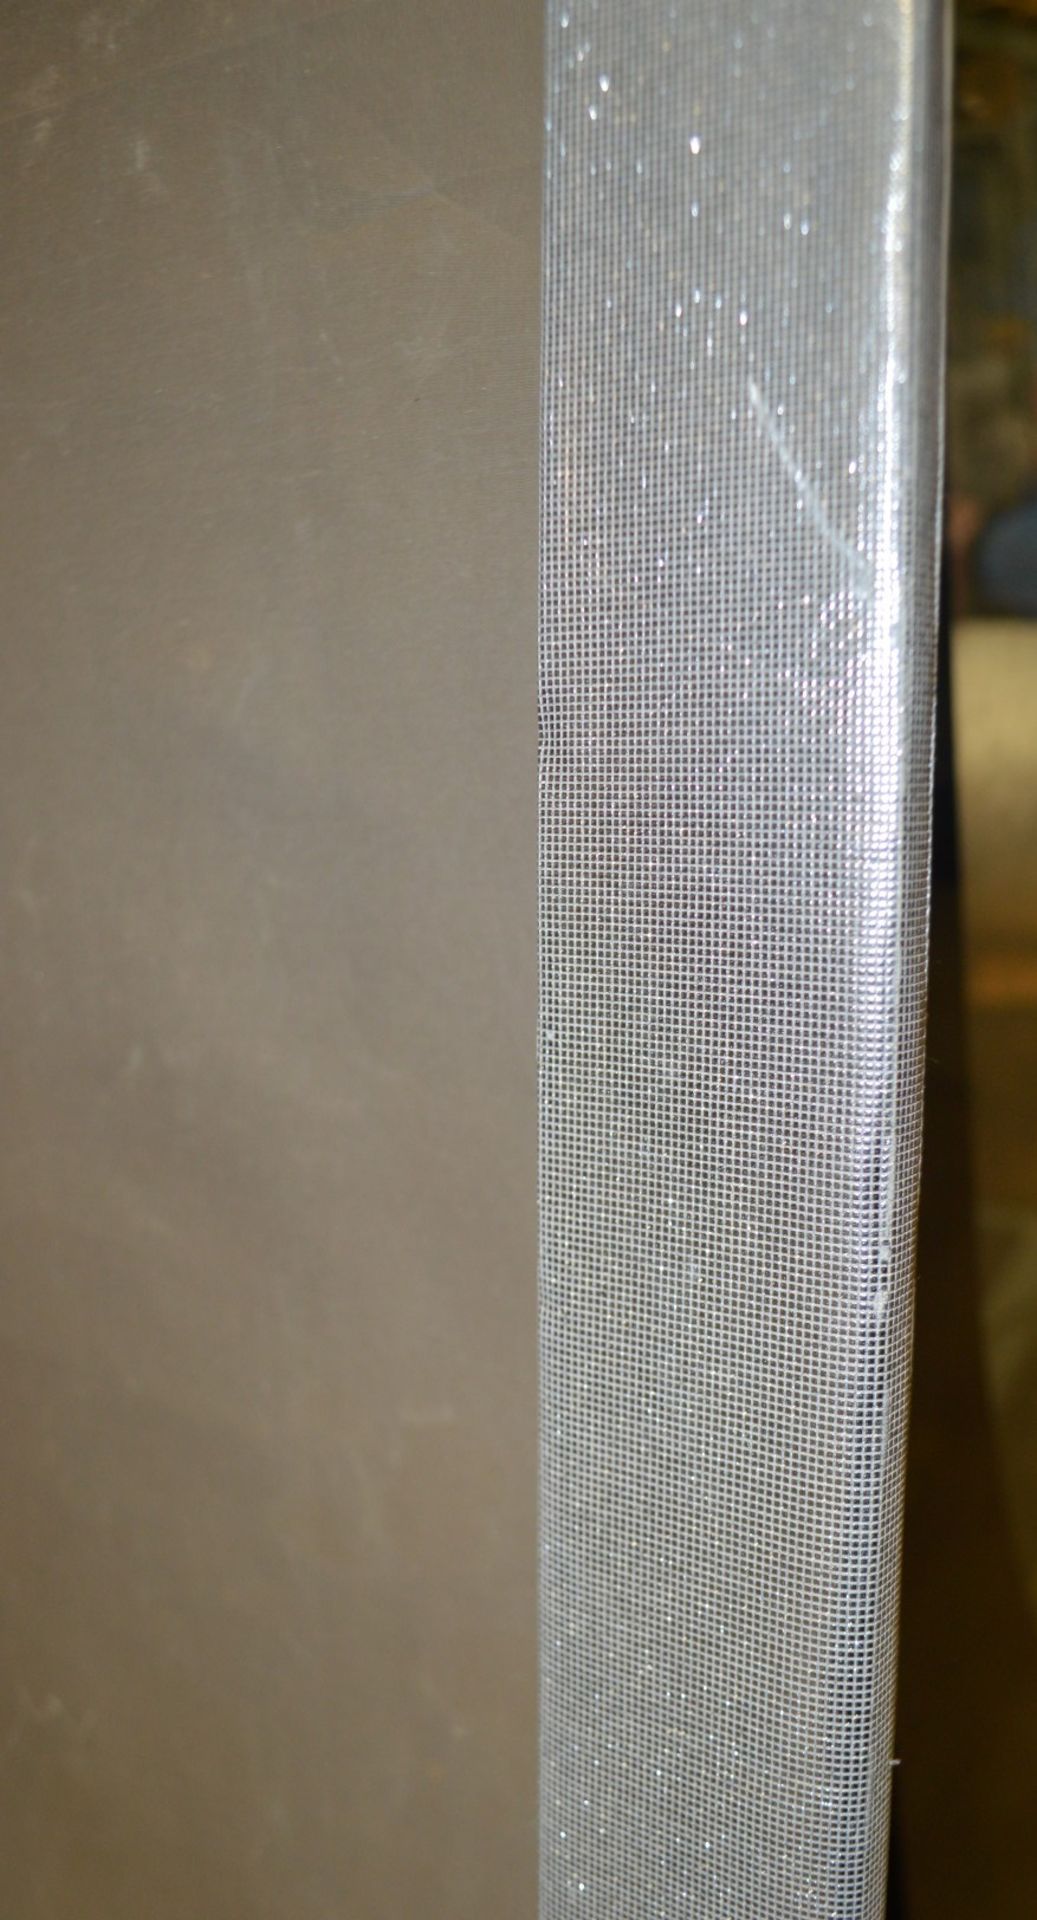 1 x Oblong-Shaped Silver Inset Upholstered Frame Lined With A Shimmering Silk Style Fabric - Image 6 of 6